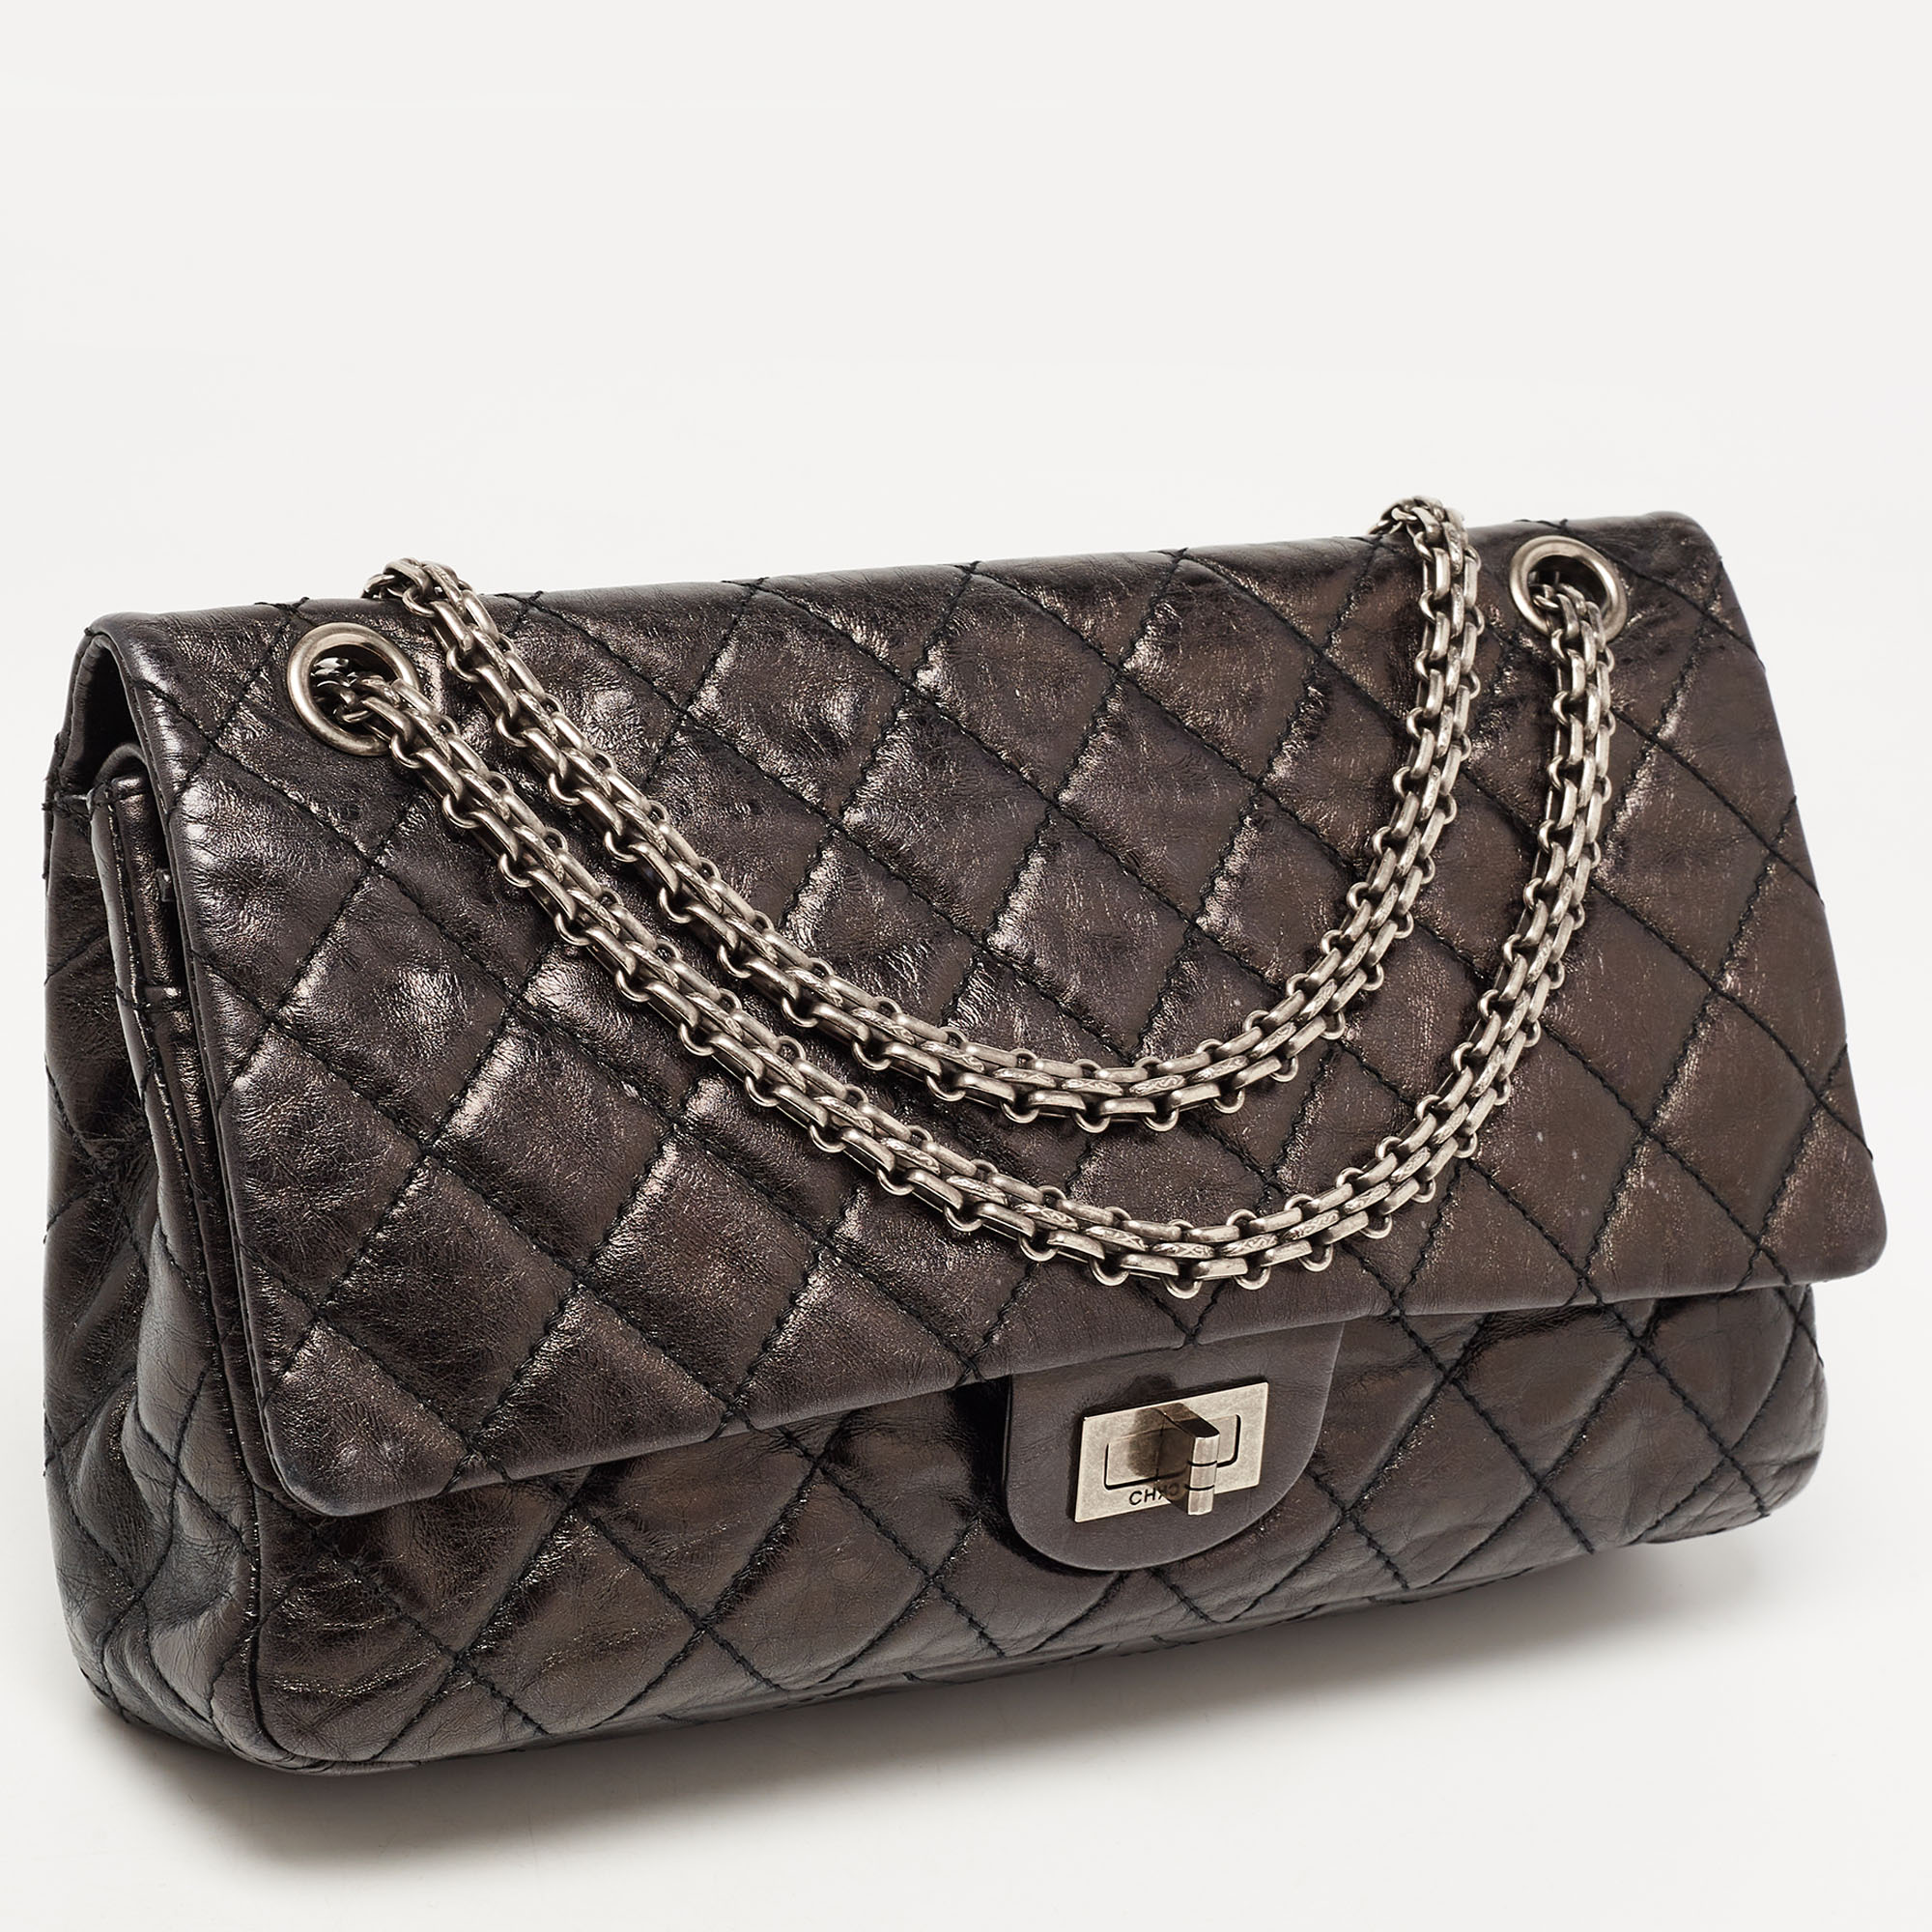 Chanel Metallic Grey/Black Quilted Leather 226 Reissue 2.55 Flap Bag